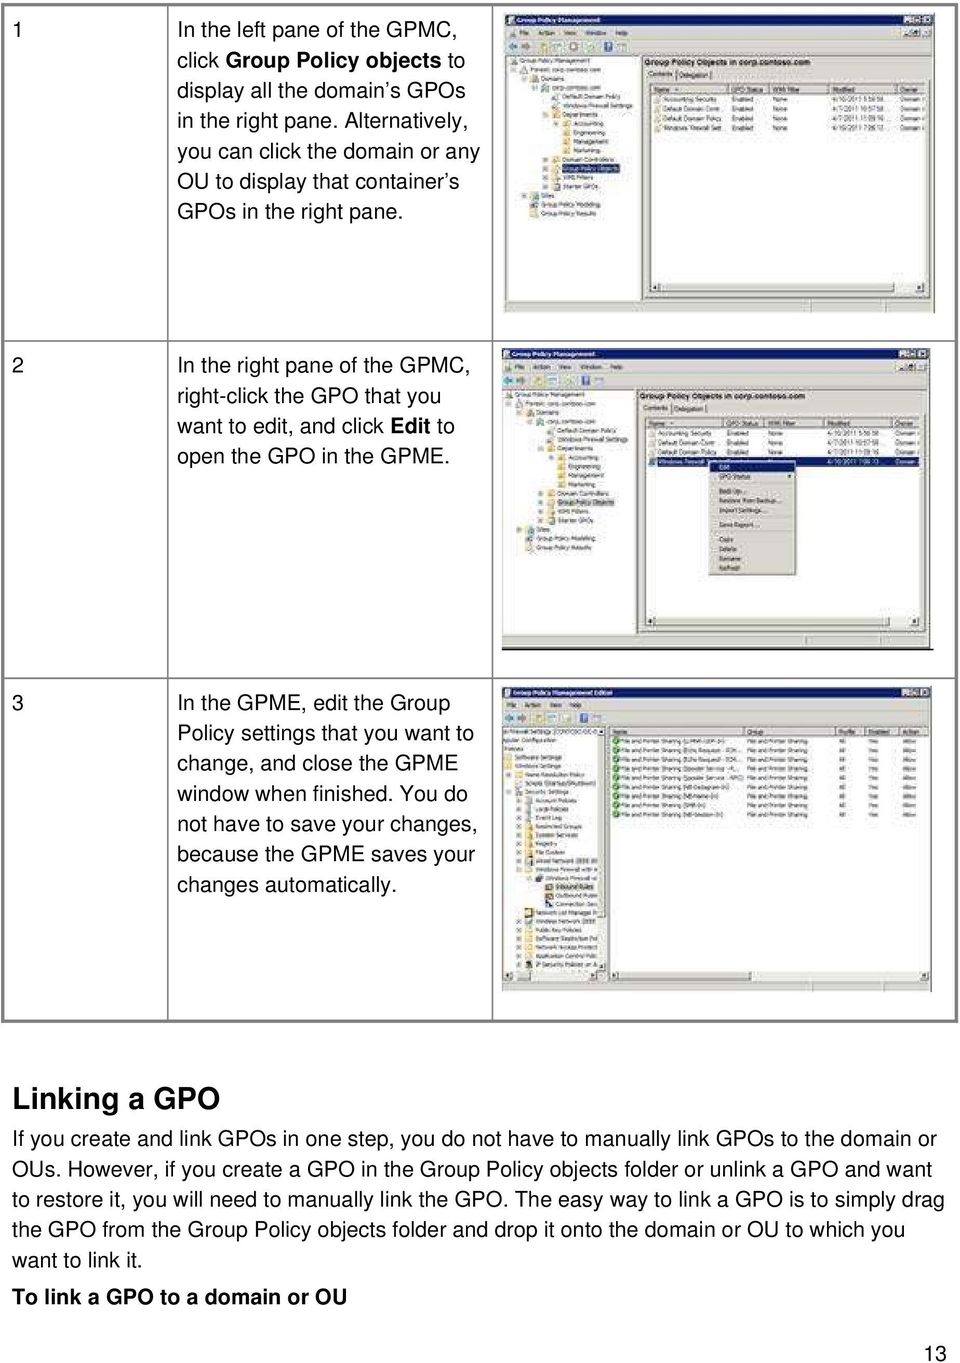 2 In the right pane of the GPMC, right-click the GPO that you want to edit, and click Edit to open the GPO in the GPME.